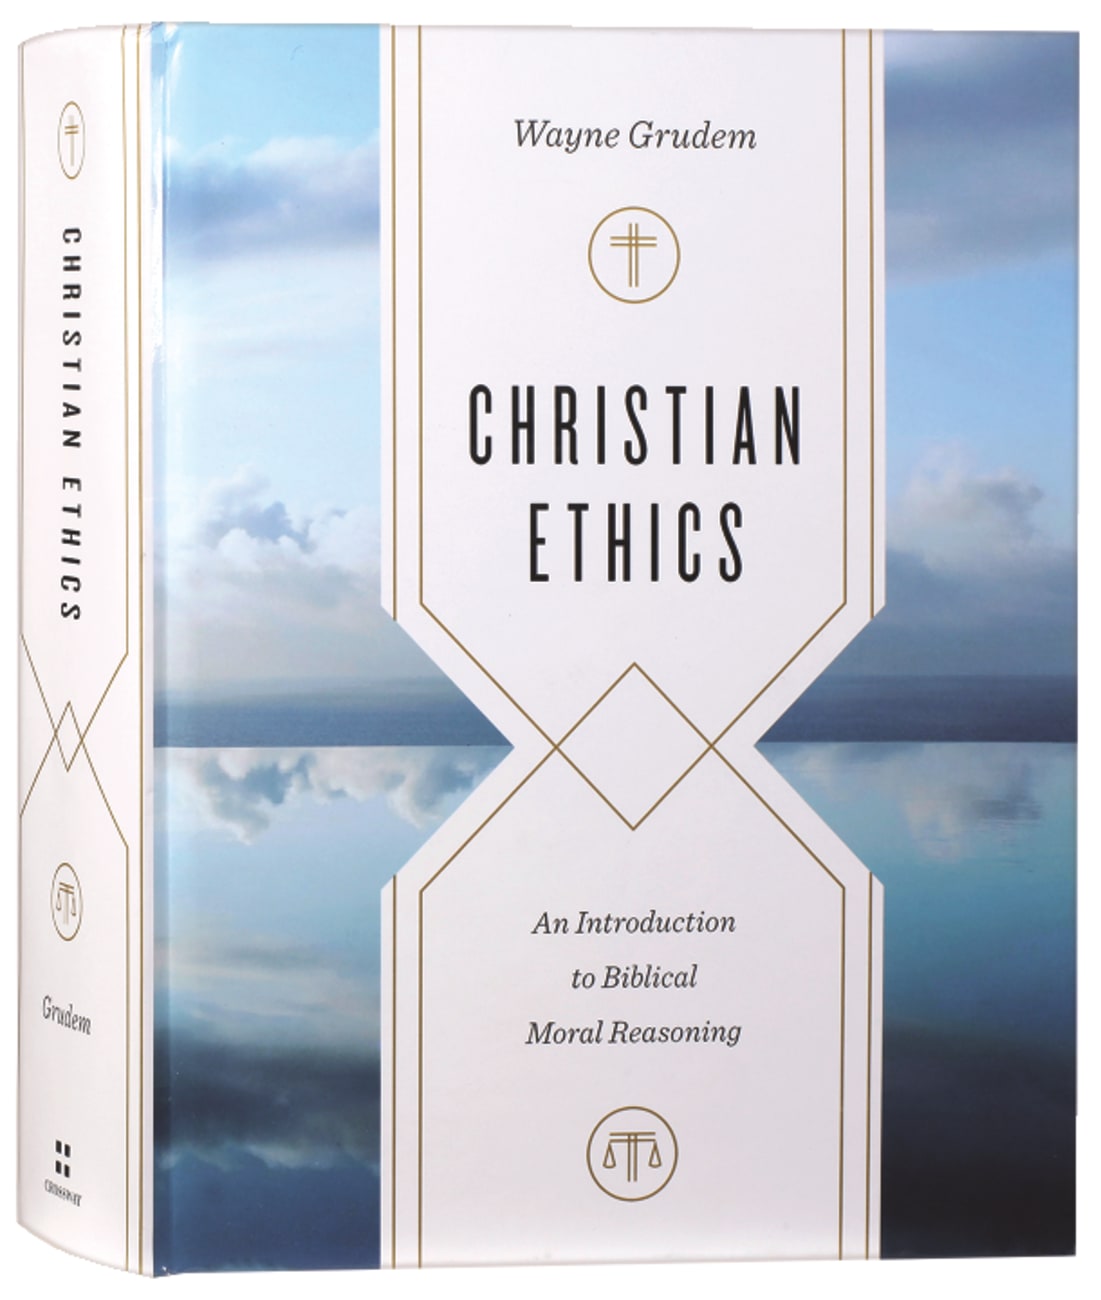 CHRISTIAN ETHICS: AN INTRODUCTION TO BIBLICAL MORAL REASONING